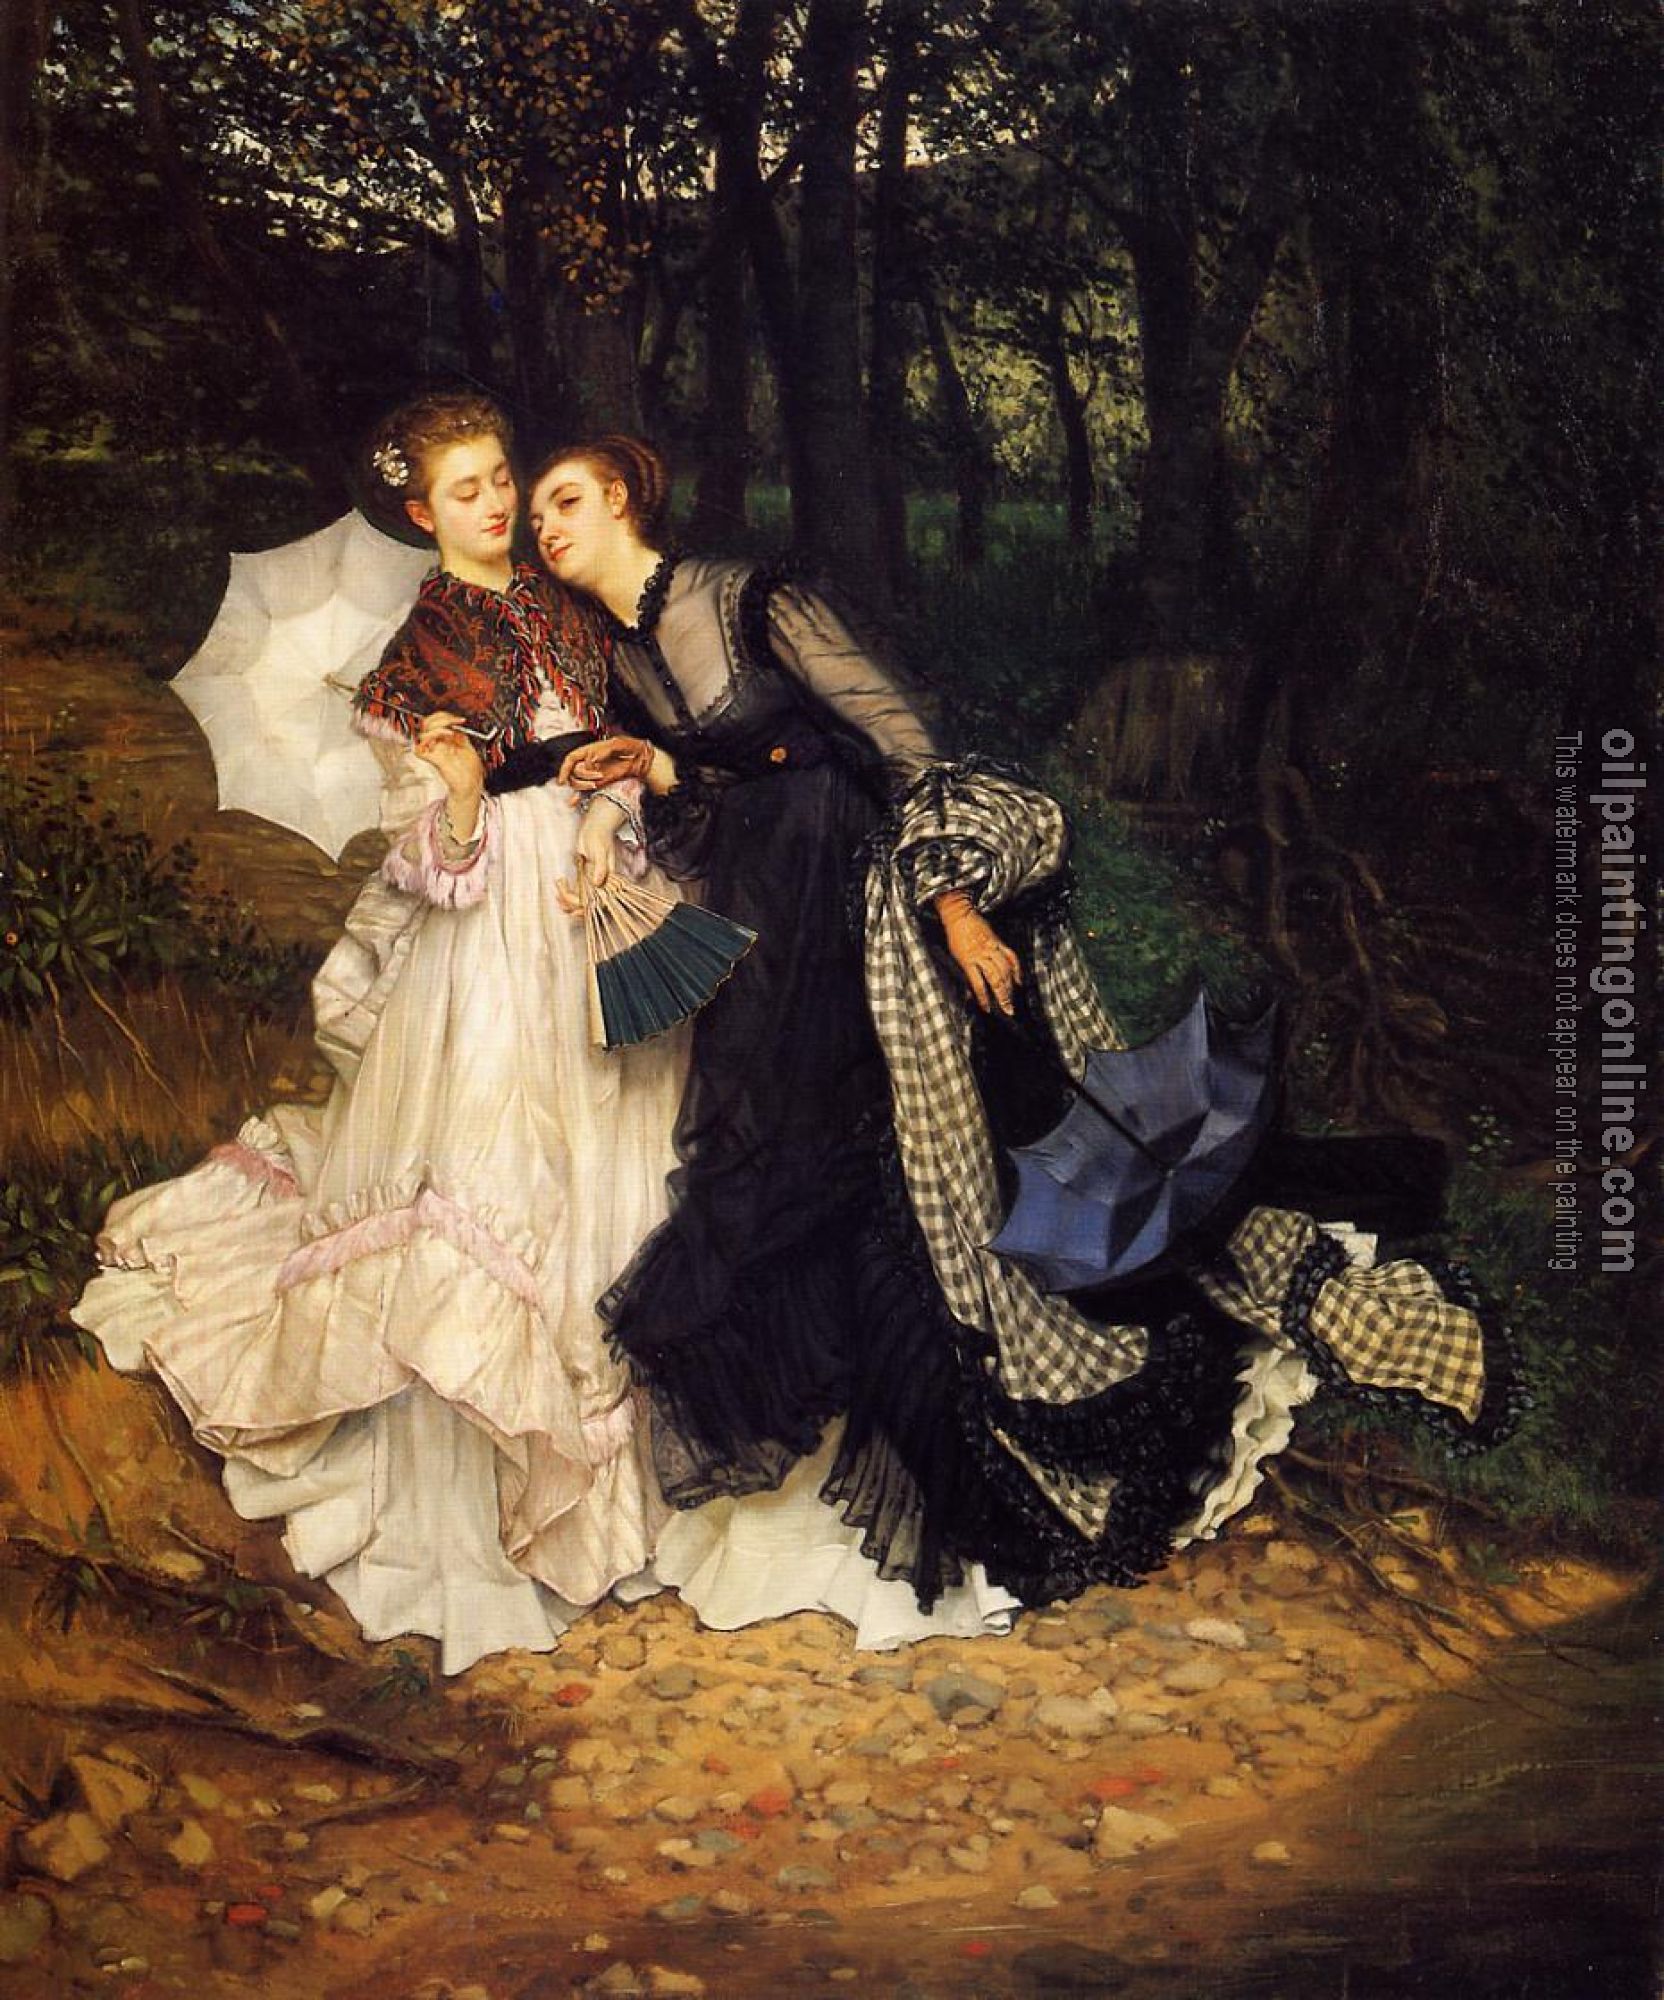 Tissot, James - The Confidence aka The Admission